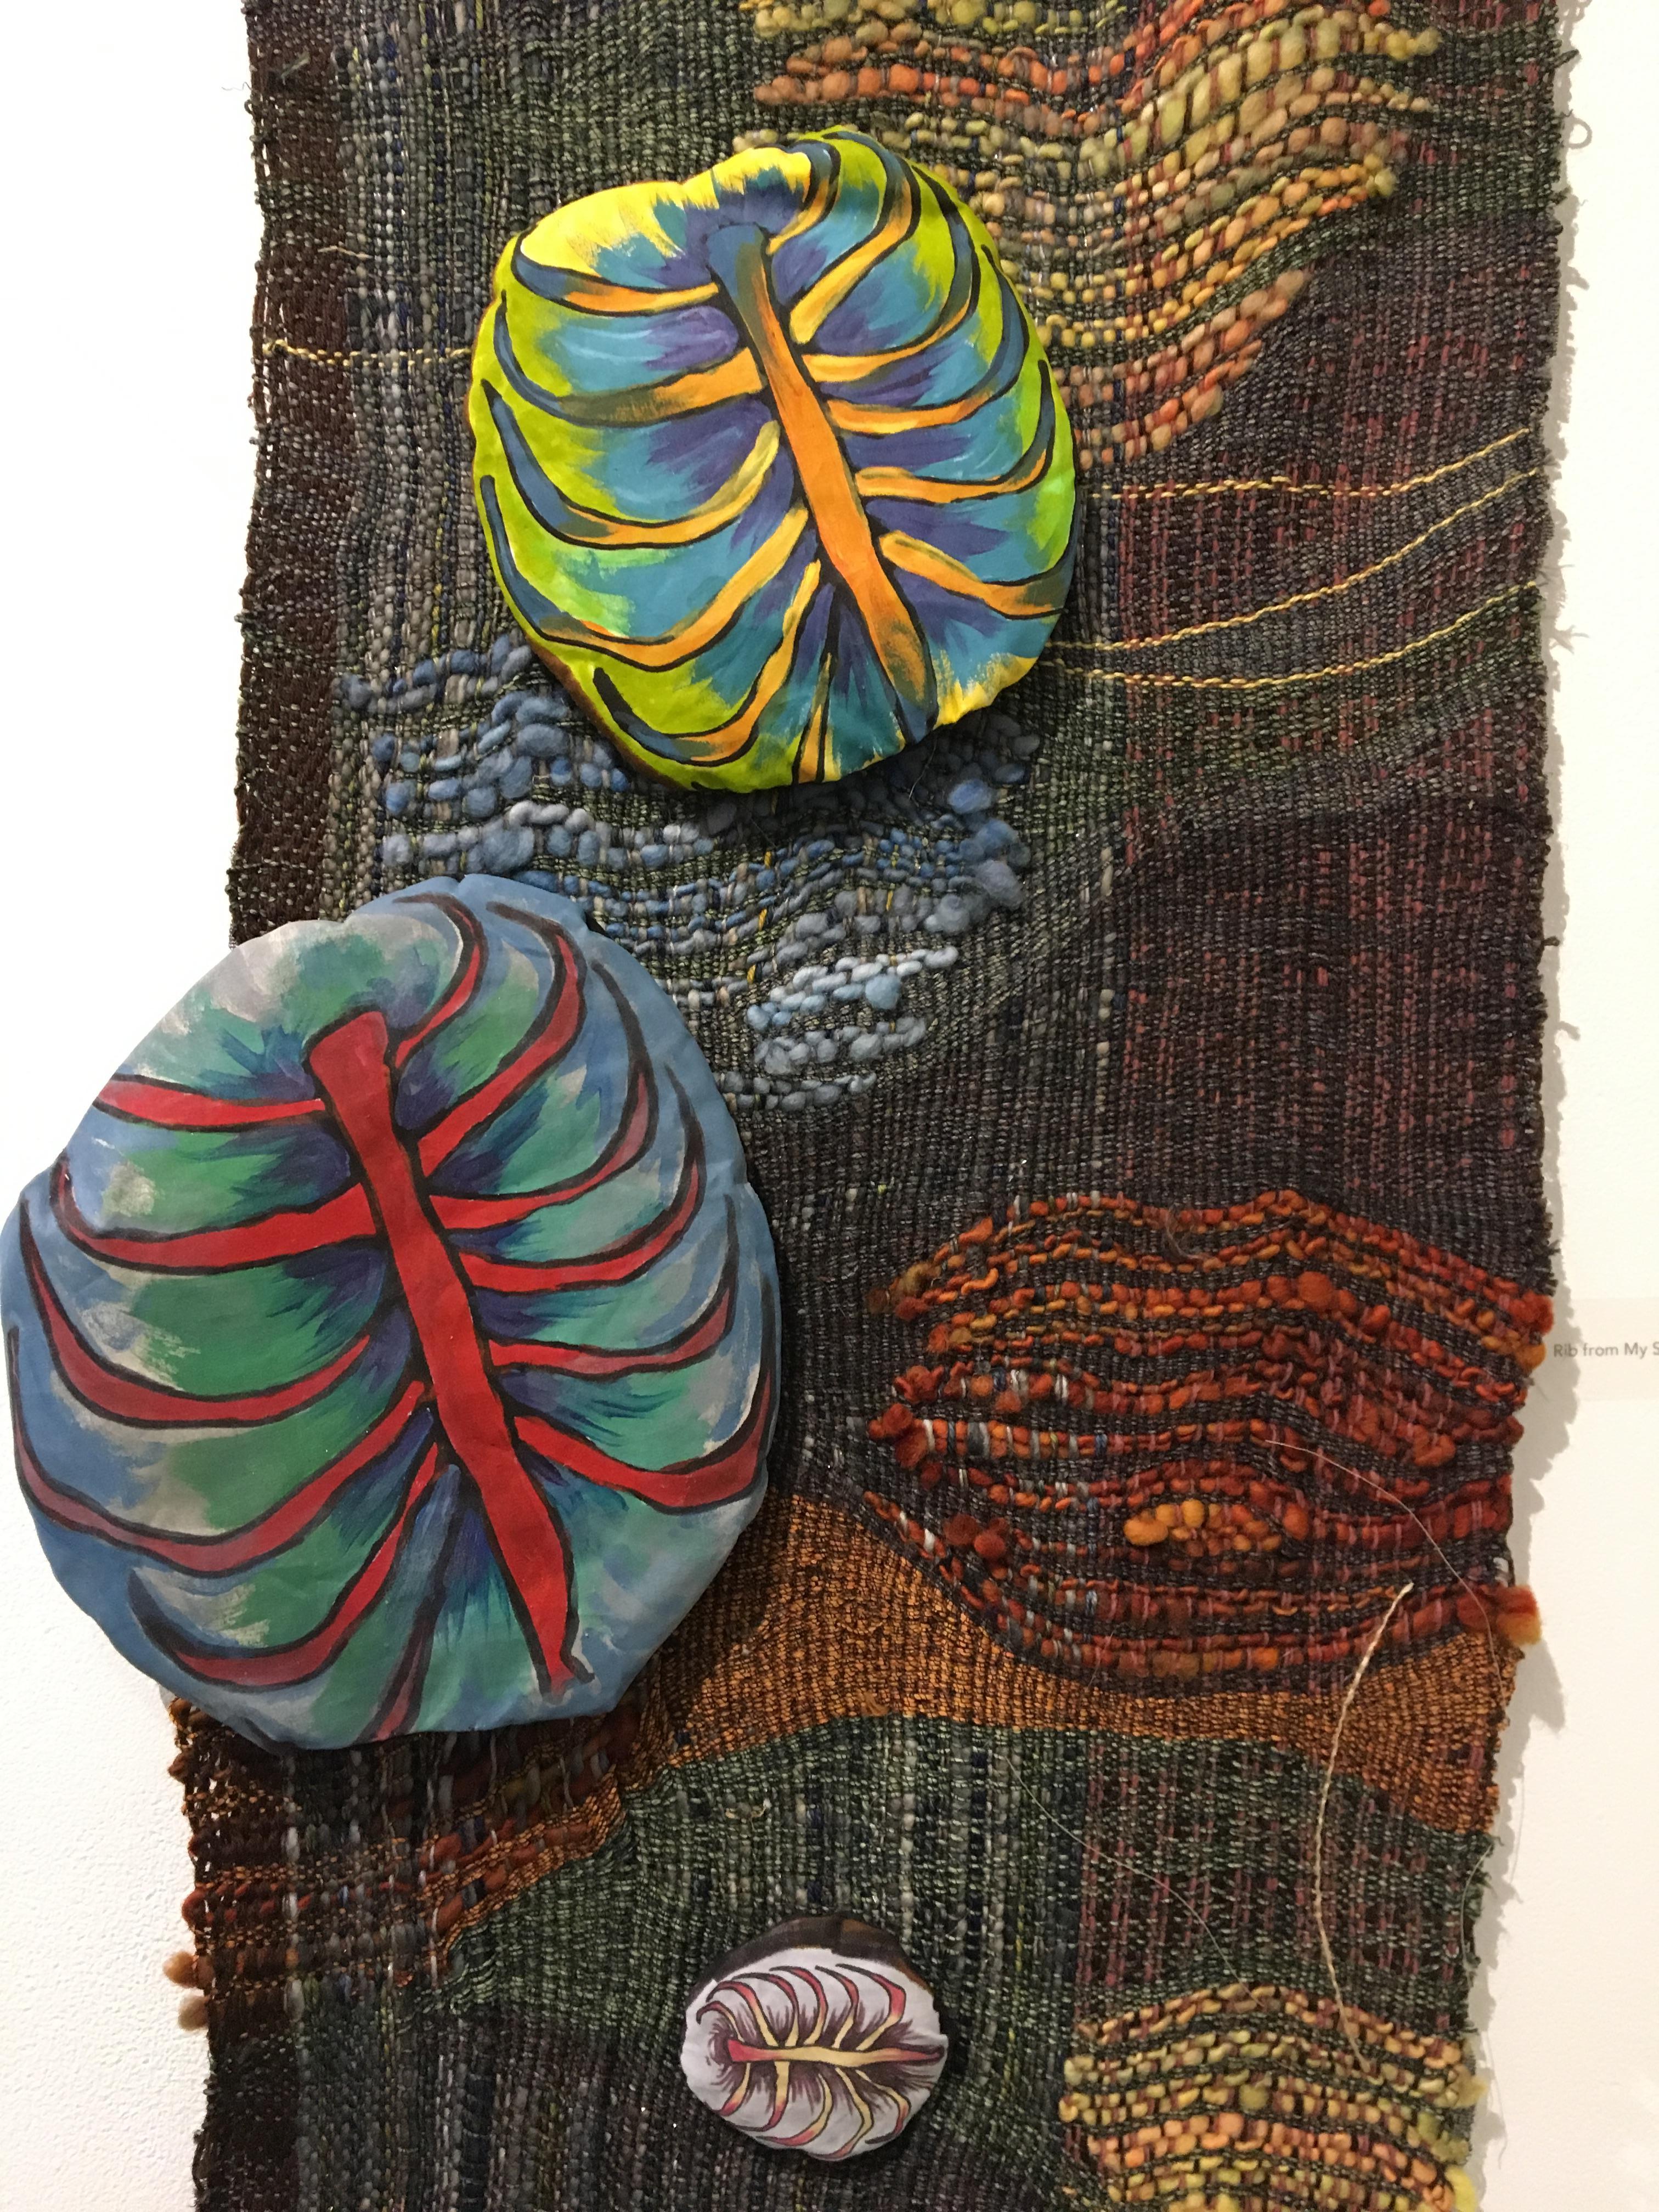 Textile Handwoven Wall Hanging: 'Rib from My Side Small' - Contemporary Mixed Media Art by Juliet Martin